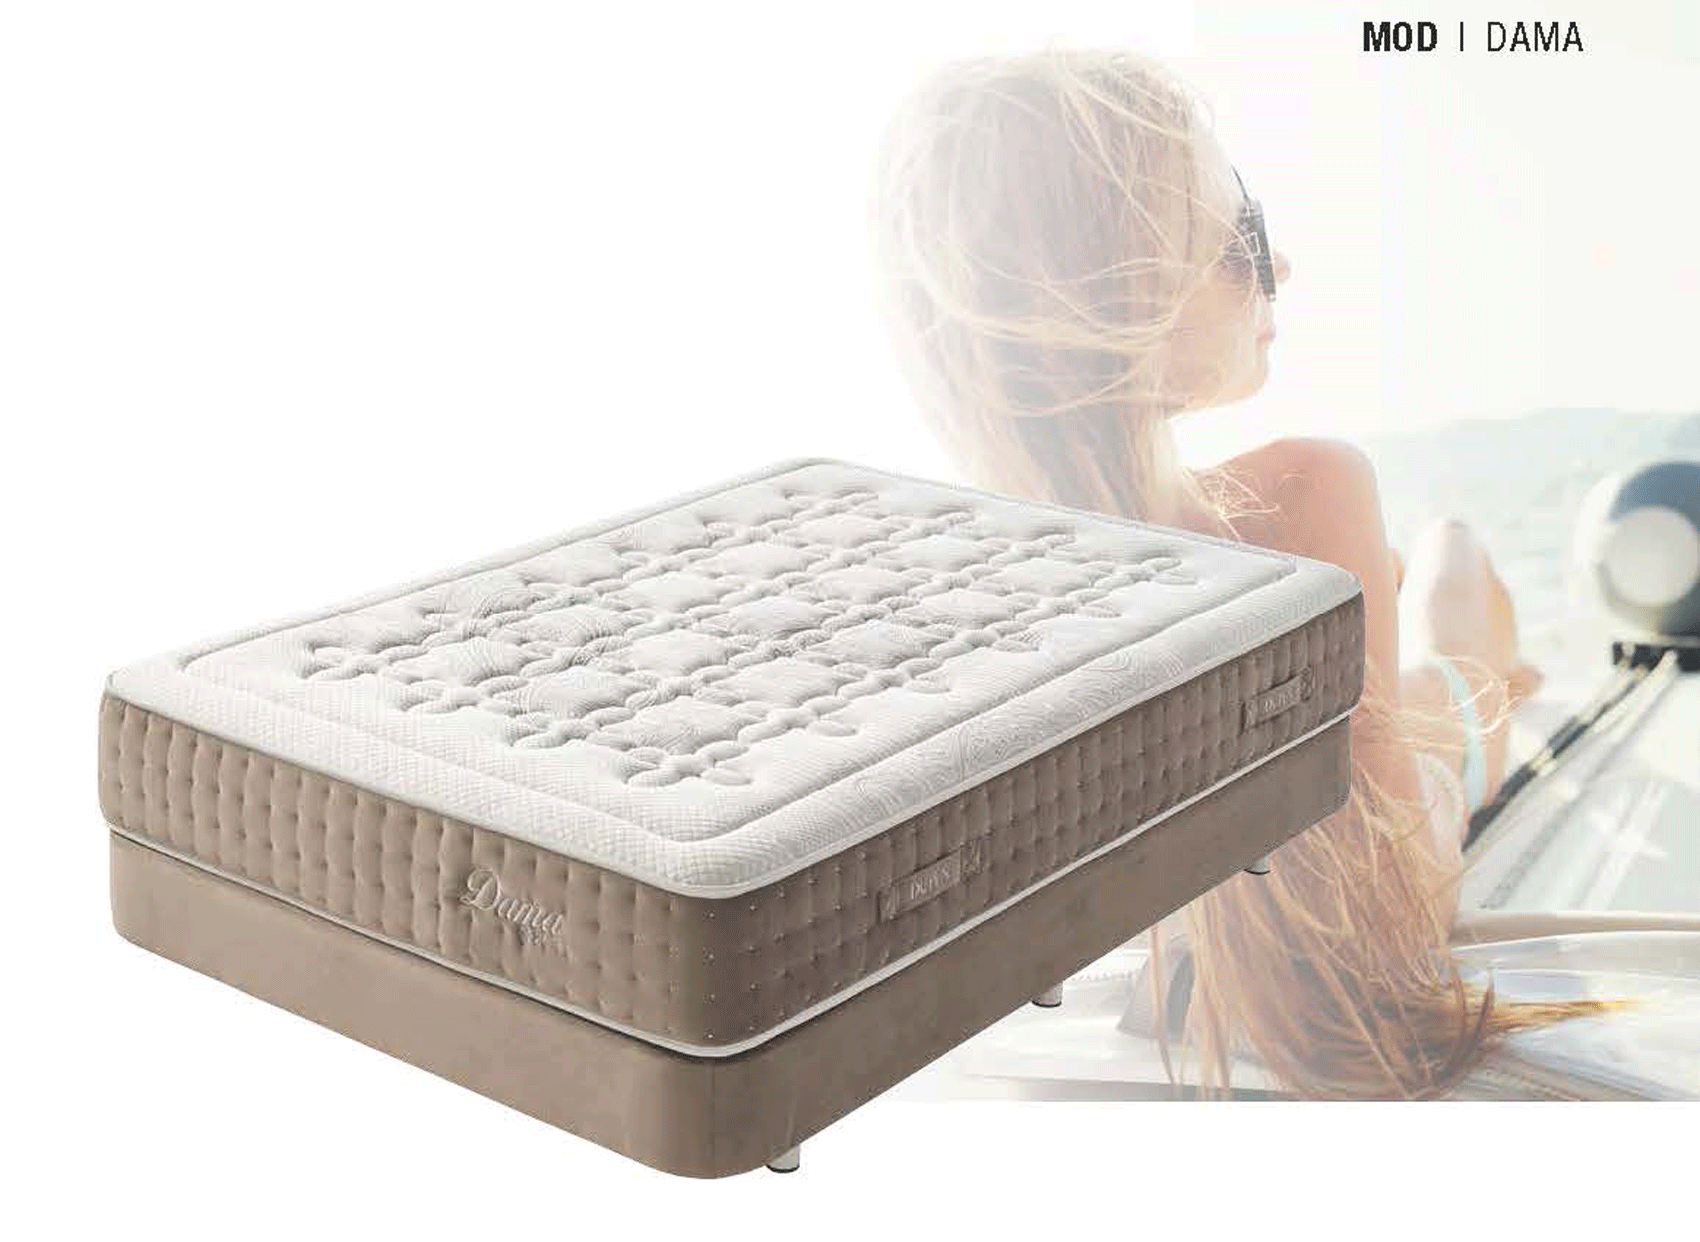 Bedroom Furniture Dressers and Chests MATTRESSES DAMA